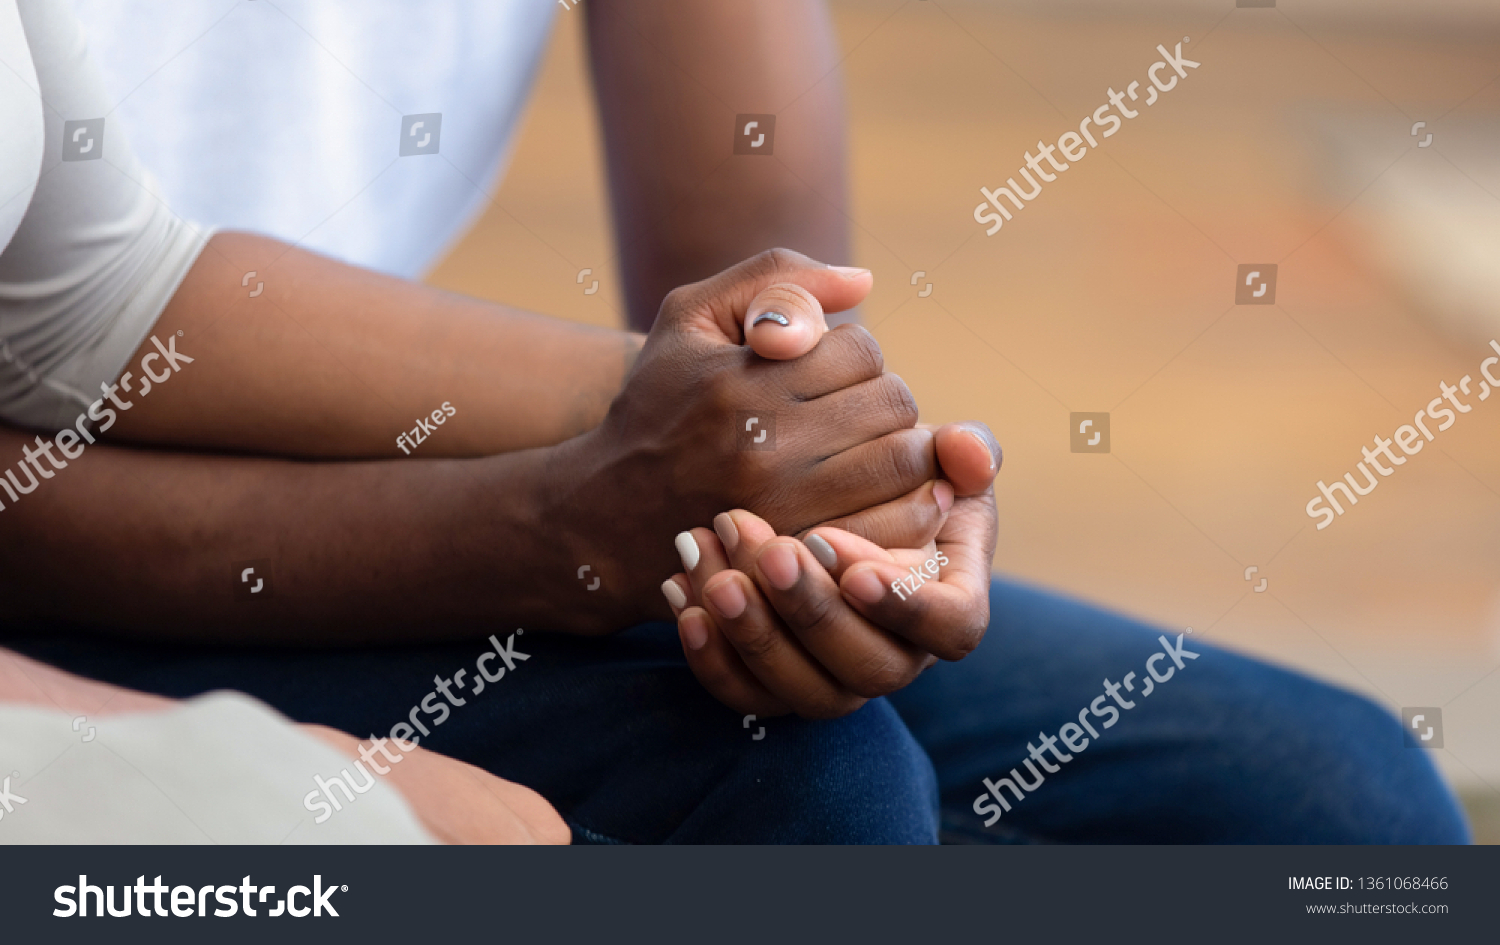 African american family couple holding hands, black man friend husband support comfort woman wife, hope empathy concept, trust care in marriage relationship, honesty and understanding, close up view #1361068466